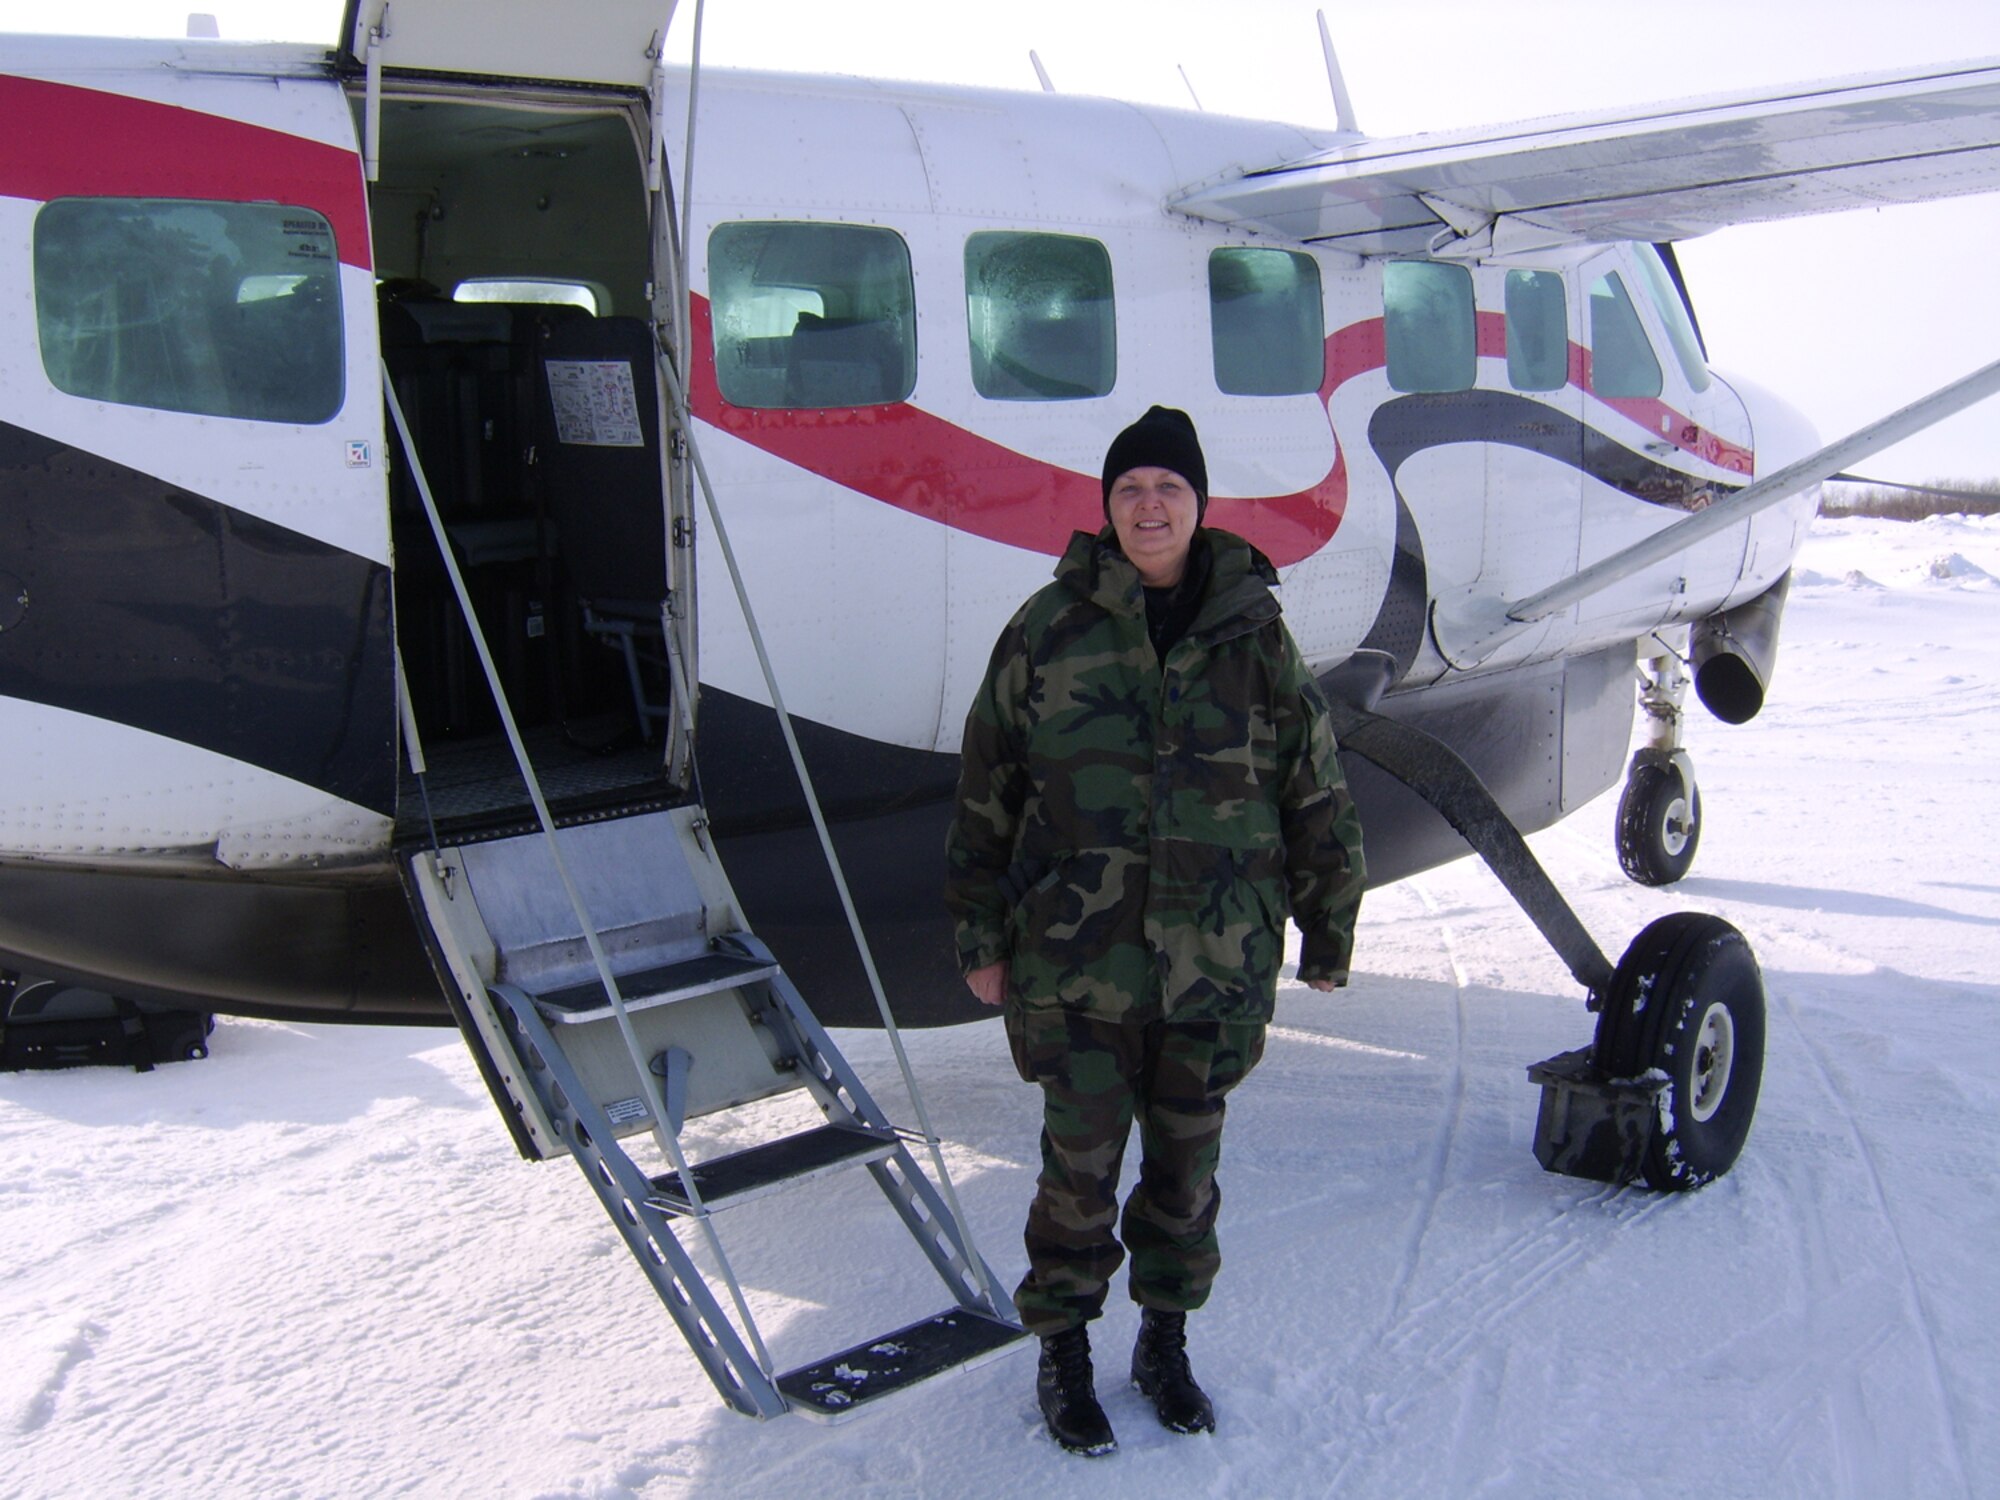 Lt. Col. Cheryl Hooper stands next to a charter plane that flew her to Bethel, Alaska, the staging point of a mission she returned from in late March. She went to Alaska in support of Operation Arctic Care, an annual military medical readiness exercise that brings no-cost health care to underserved residents of rural Alaska. Colonel Hooper is the commander of the 931st Aerospace Medicine Flight, an Air Force Reserve unit at McConnell Air Force Base, Kan. (Courtesy photo)